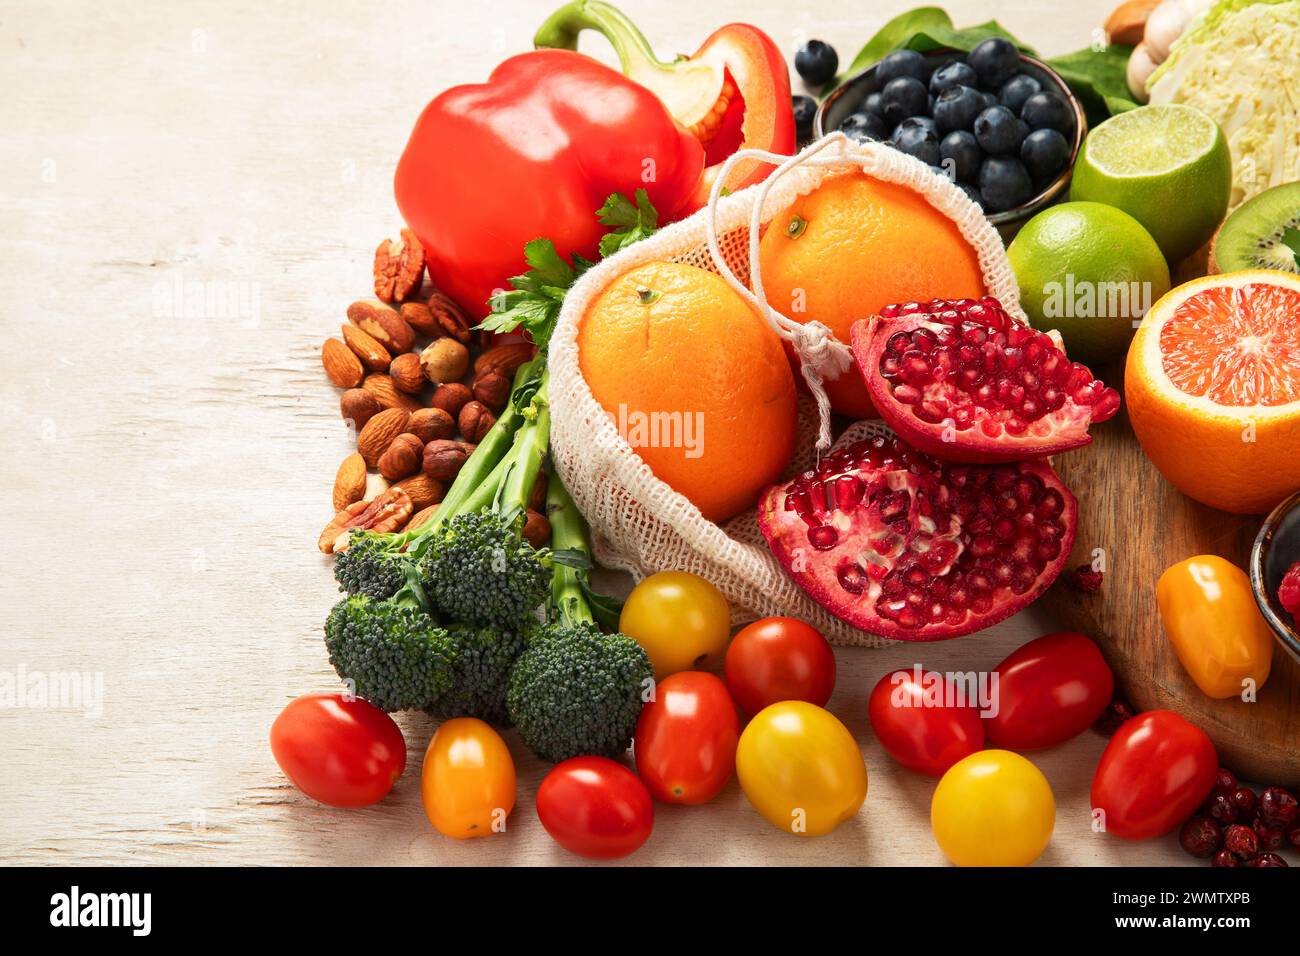 Products high in vitamin C. Healthy food concept. Top view Stock Photo